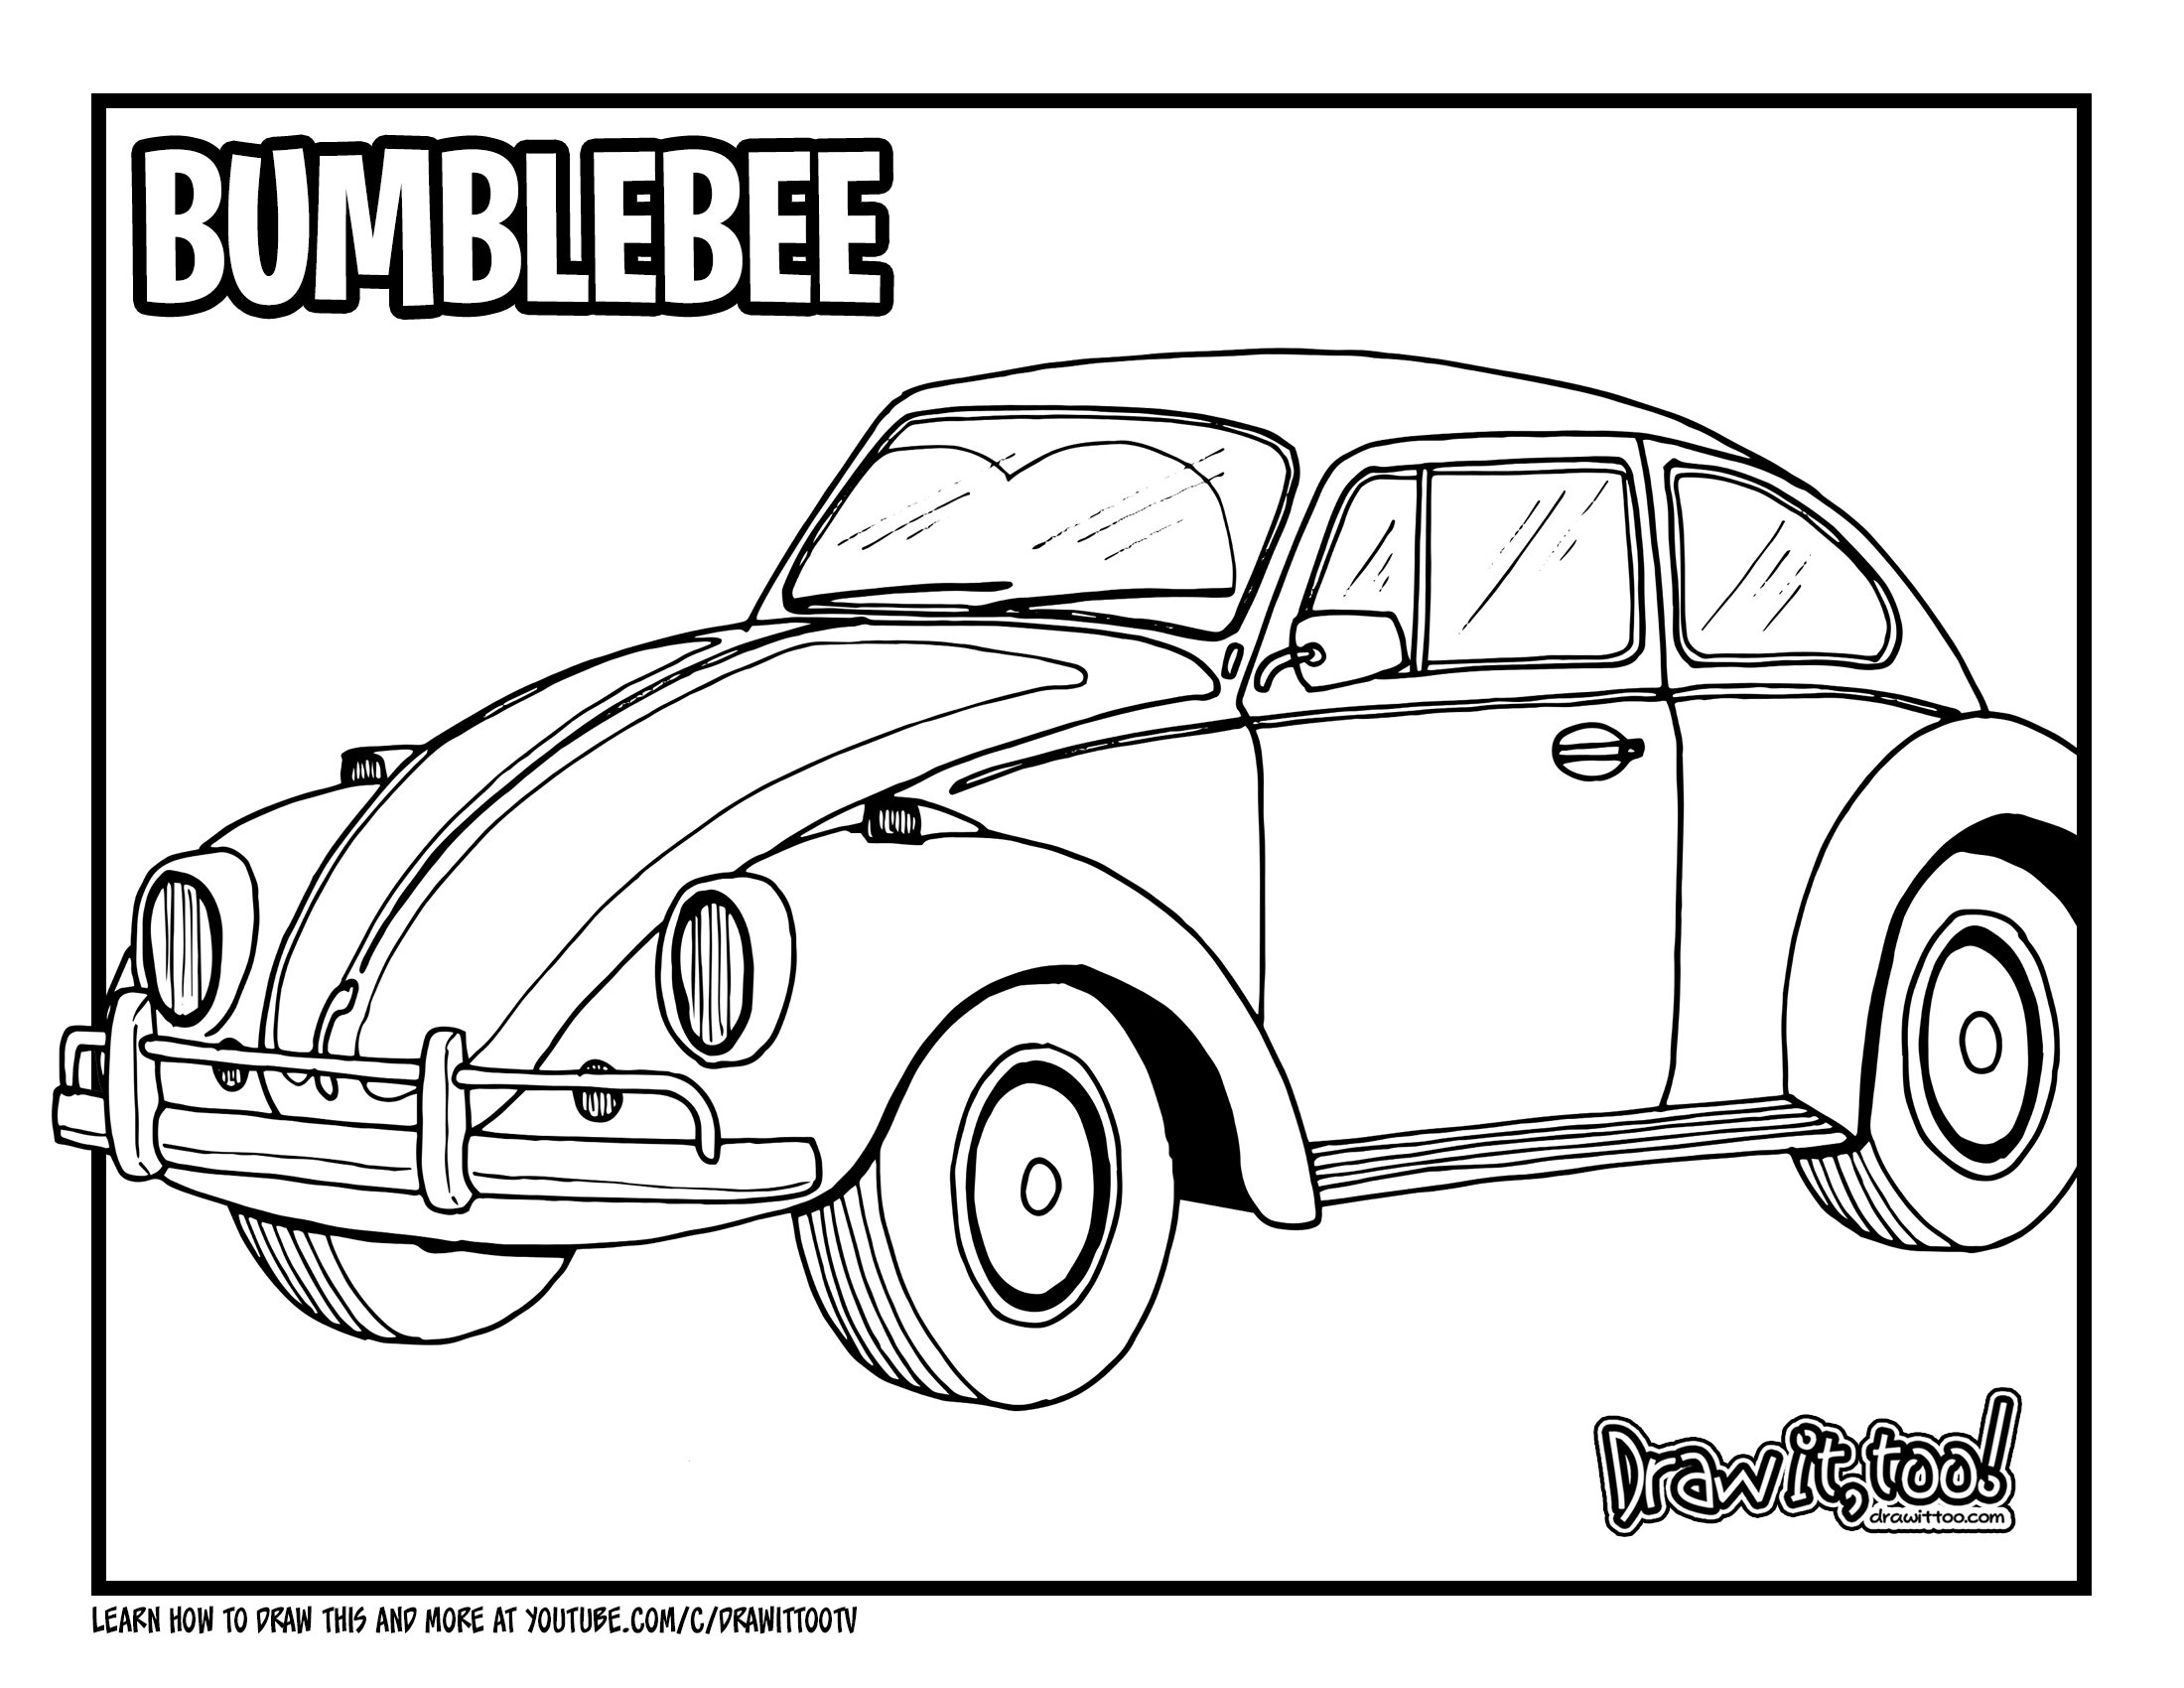 How to Draw BUMBLEBEE VEHICLE MODE (VW BEETLE) Drawing Tutorial | Draw